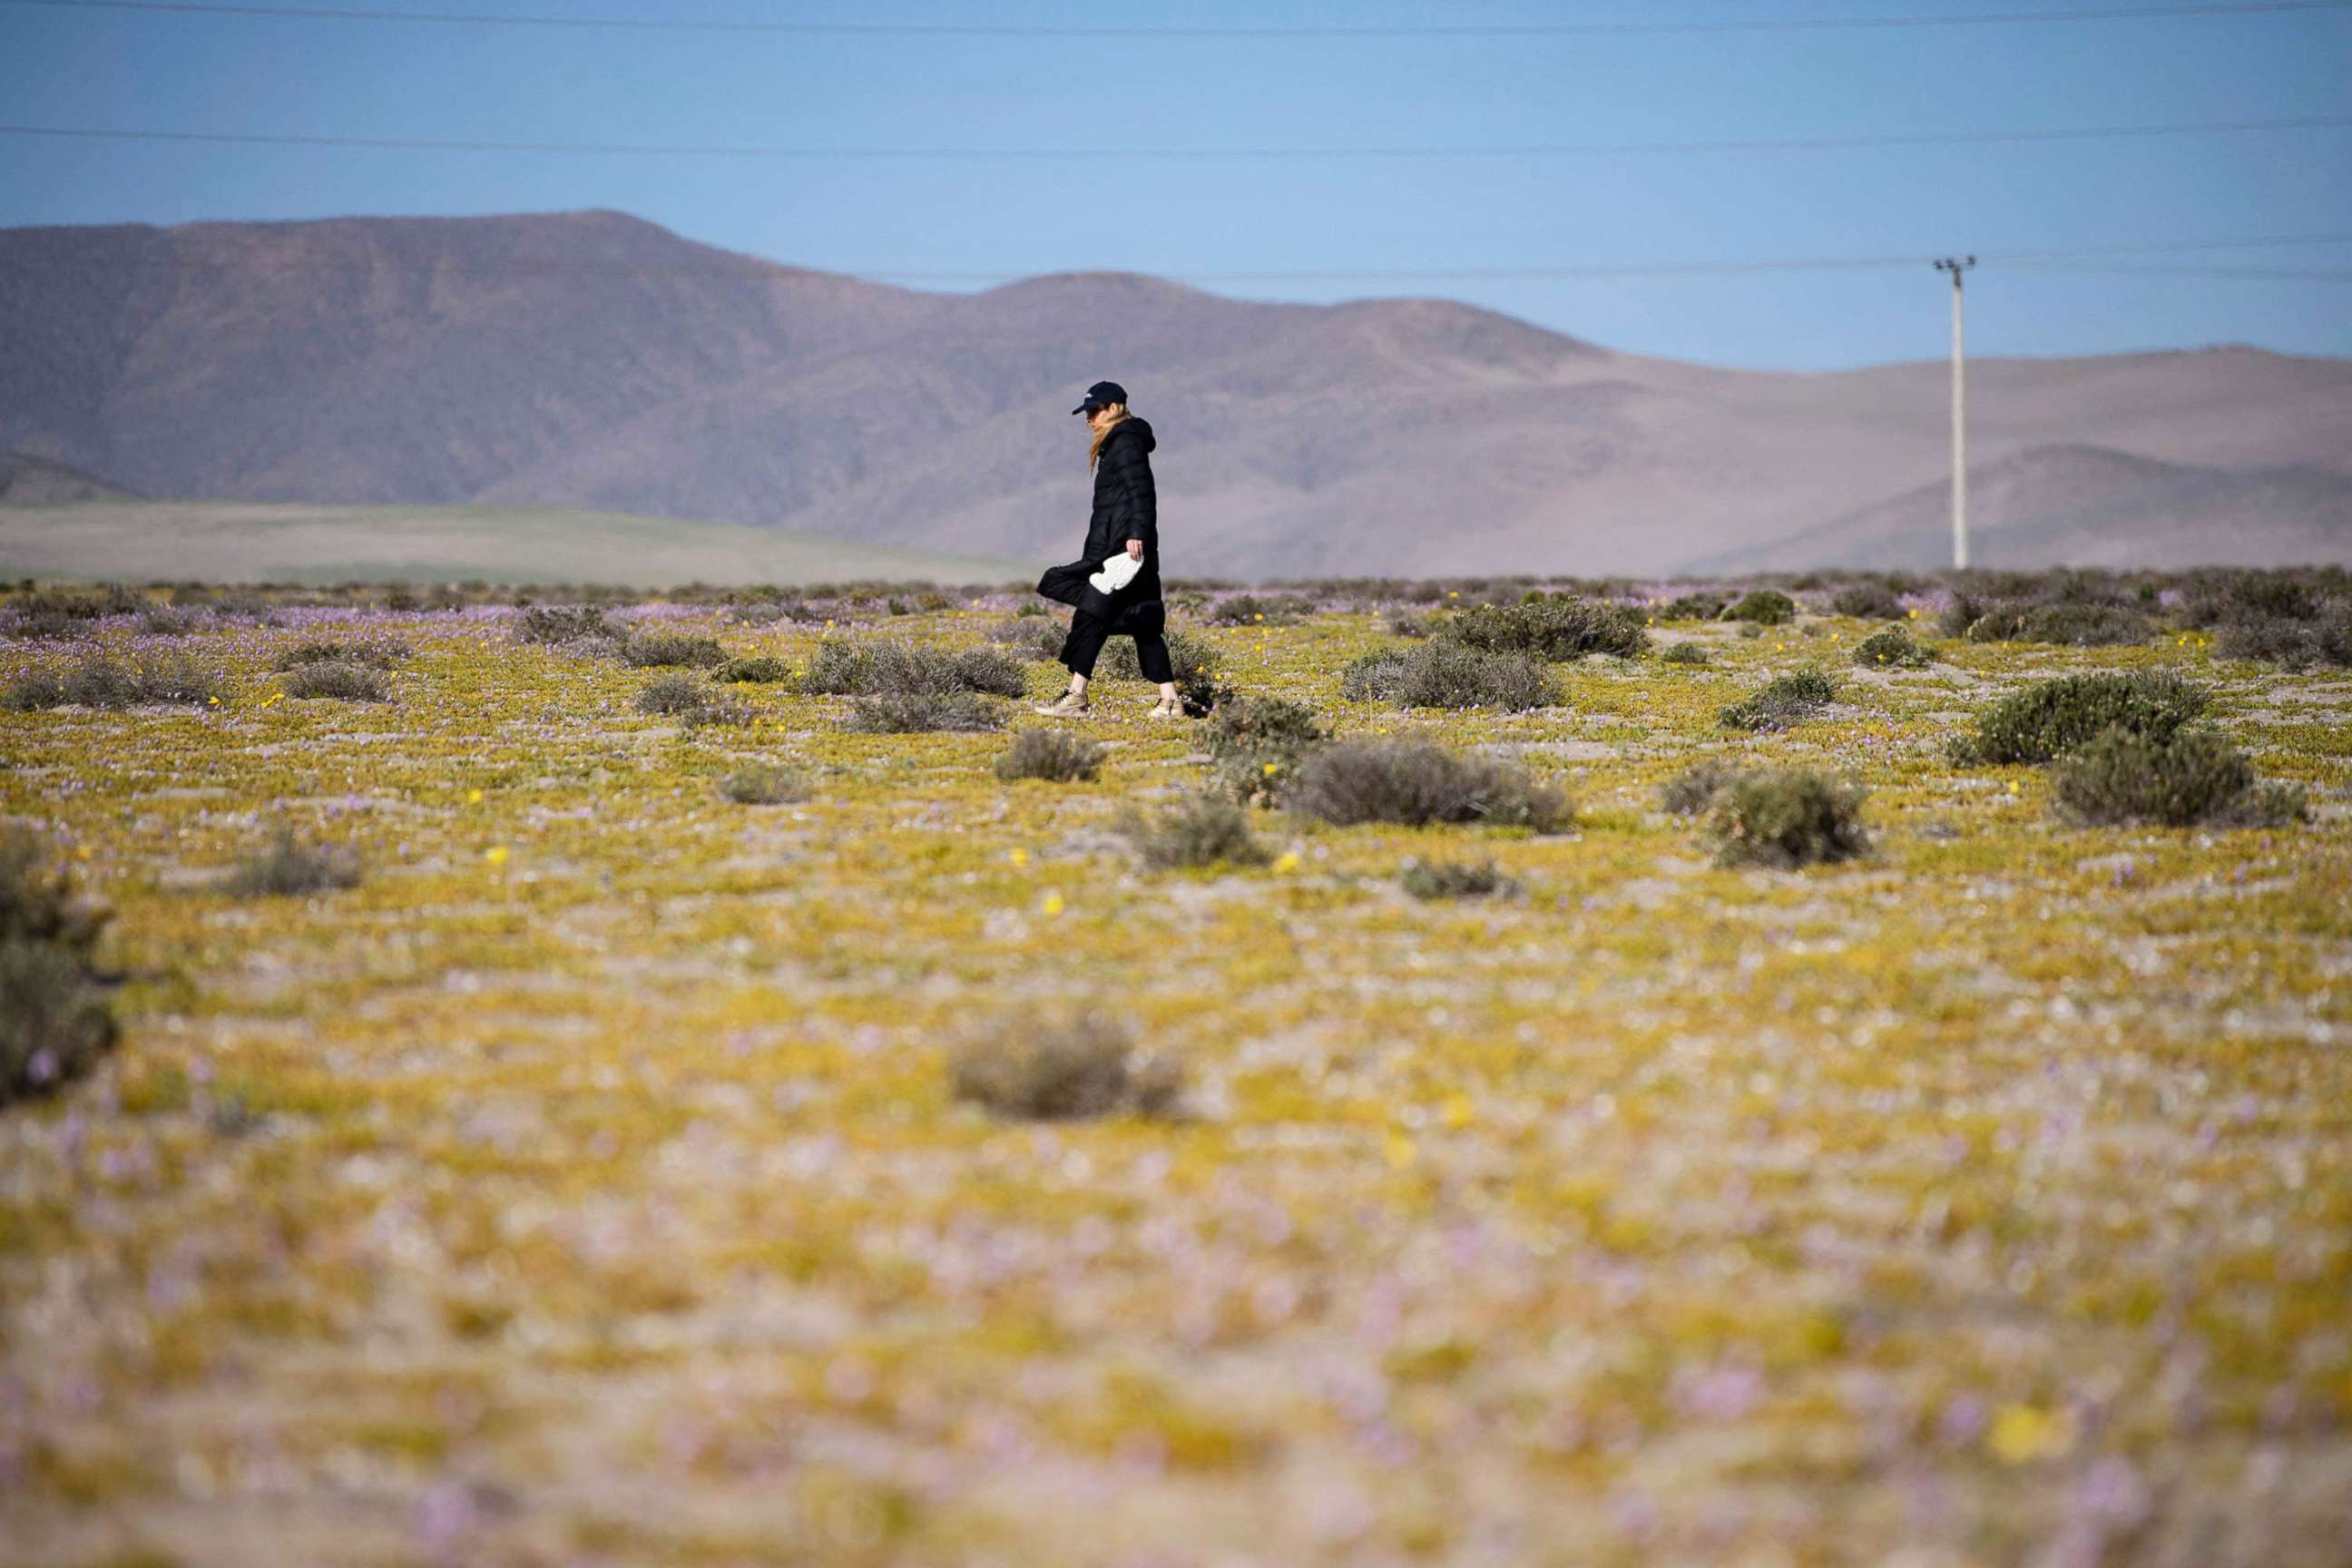 PHOTO: A woman strolls amid flowers blooming on the Atacama desert, some 600 km north of Santiago, Chile, on Oct. 13, 2021.